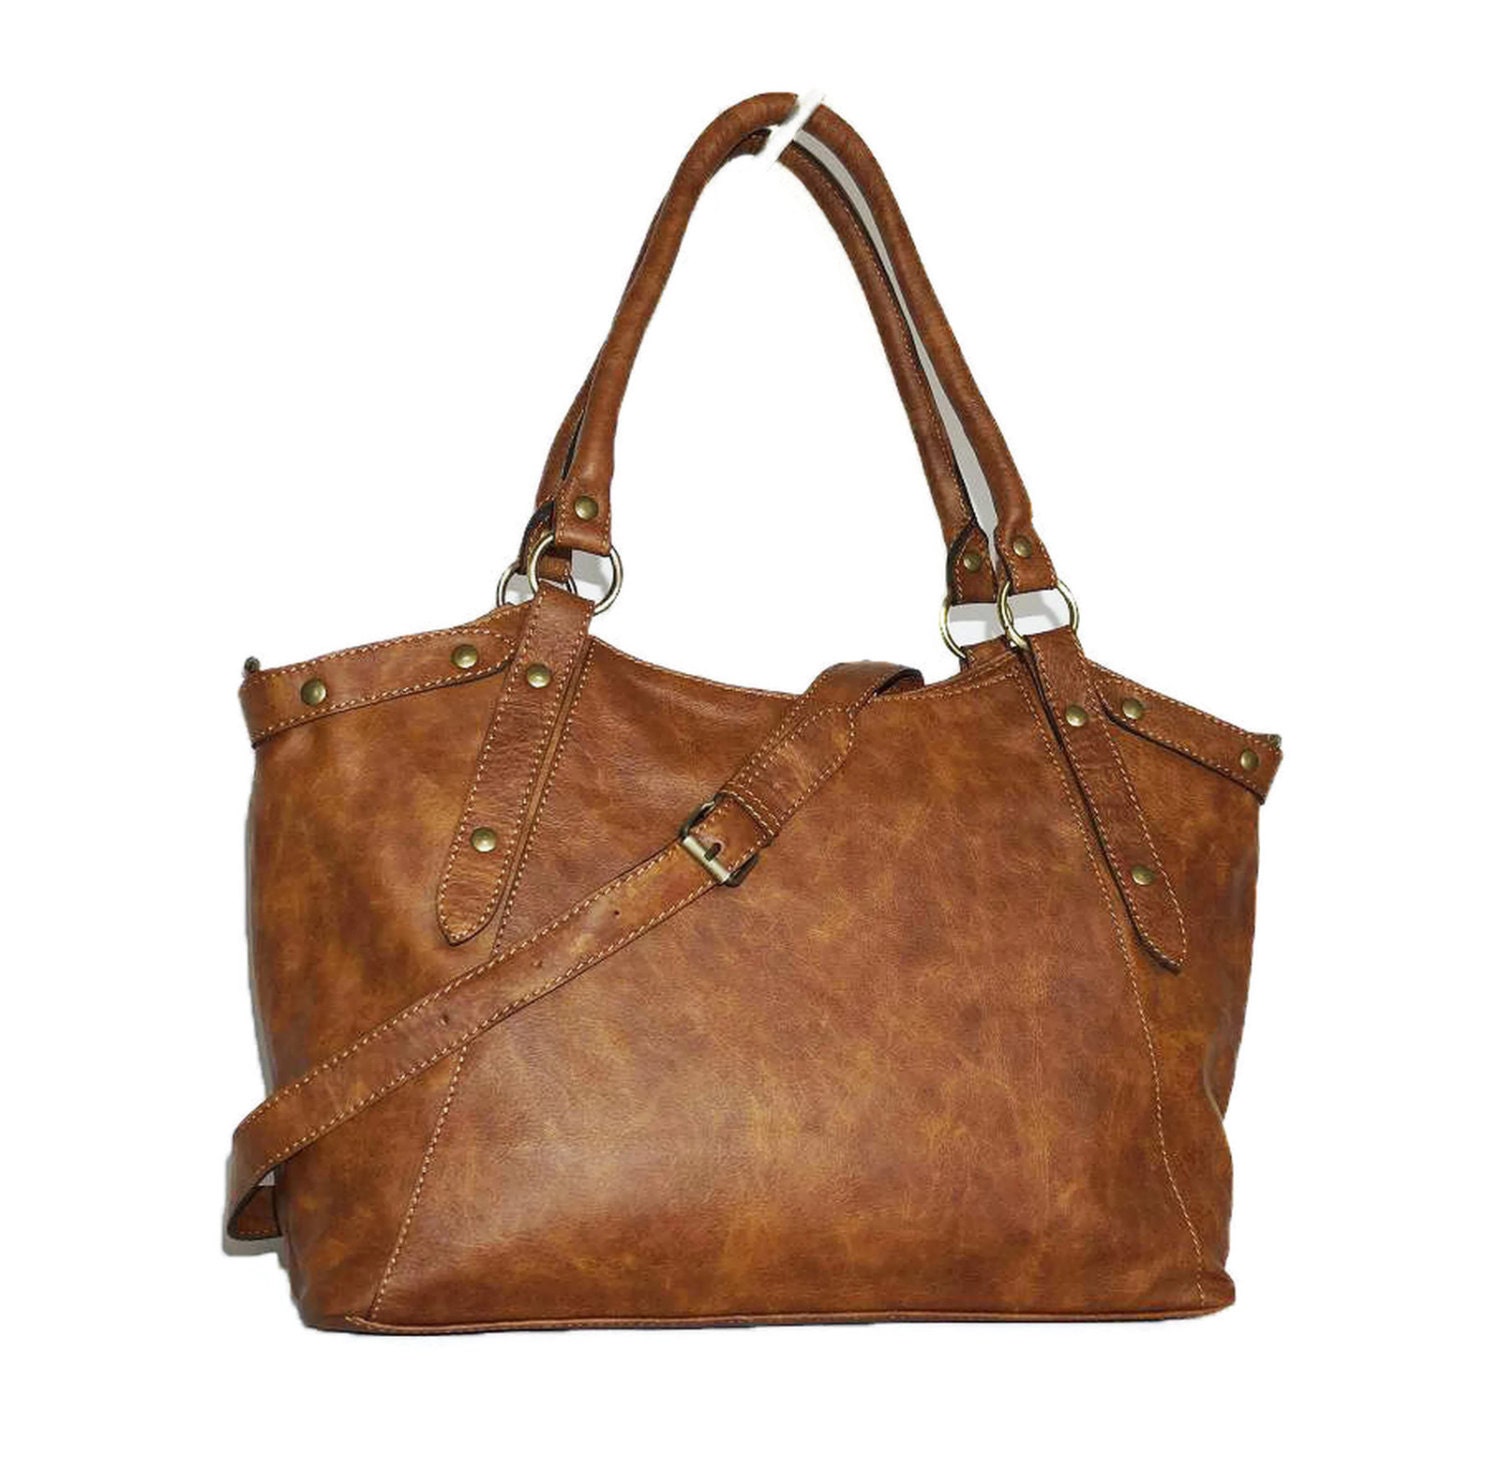 RUSTIC Leather Bag Leather Bag Handbag Tote by ChicLeather